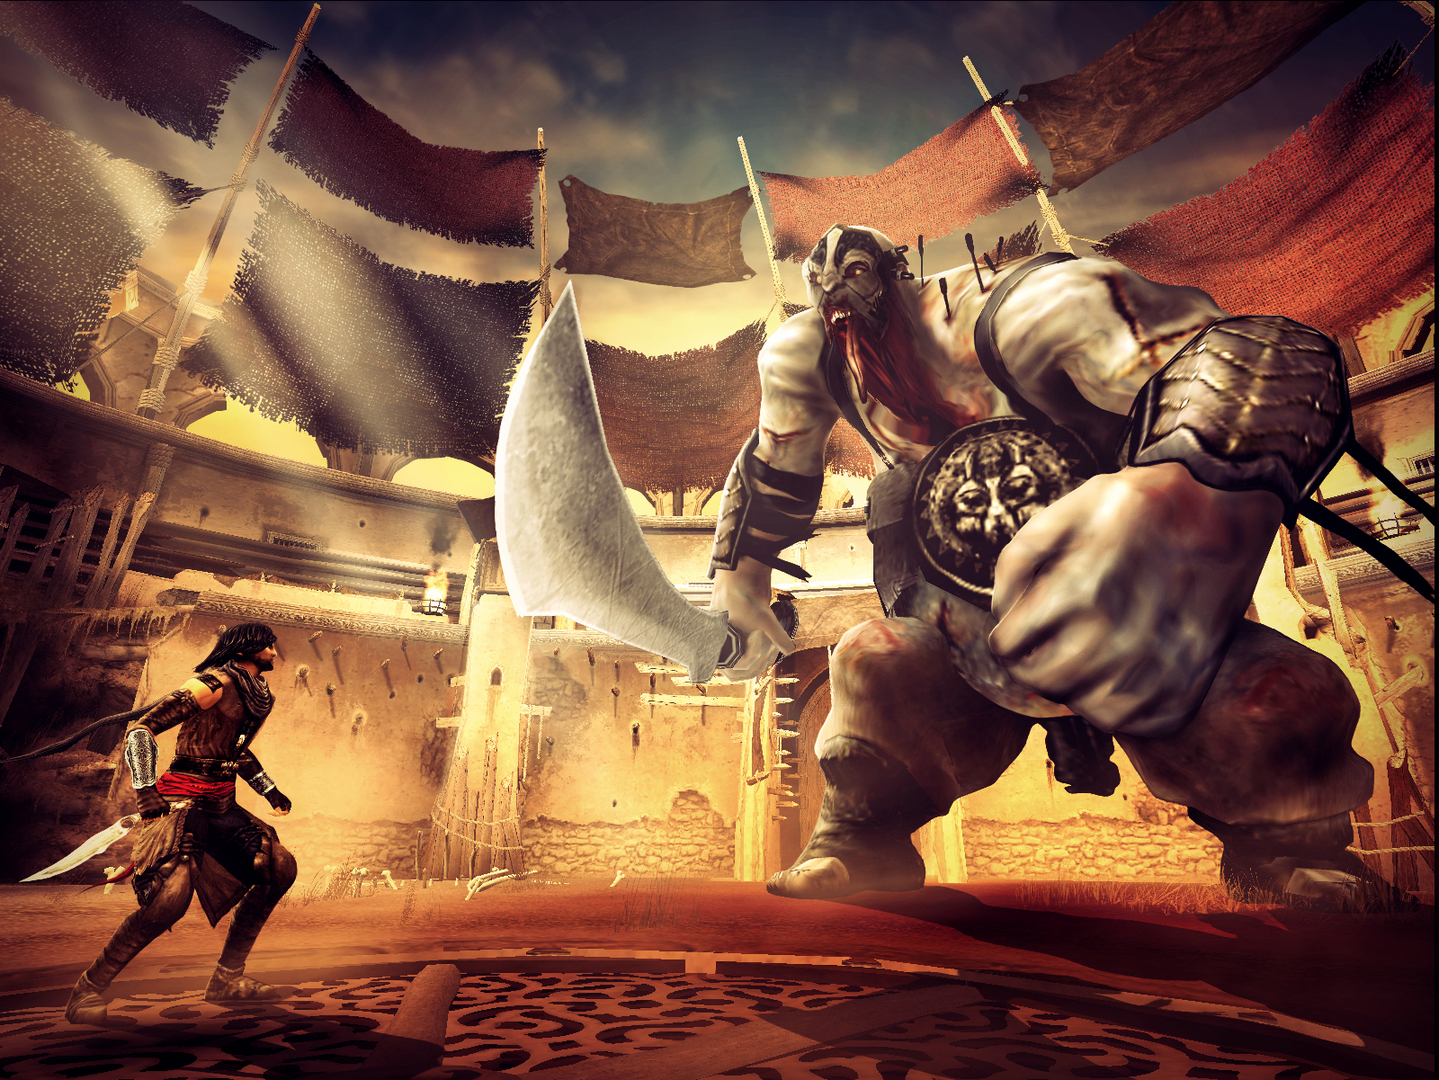 Prince of Persia: The Two Thrones screenshot 1